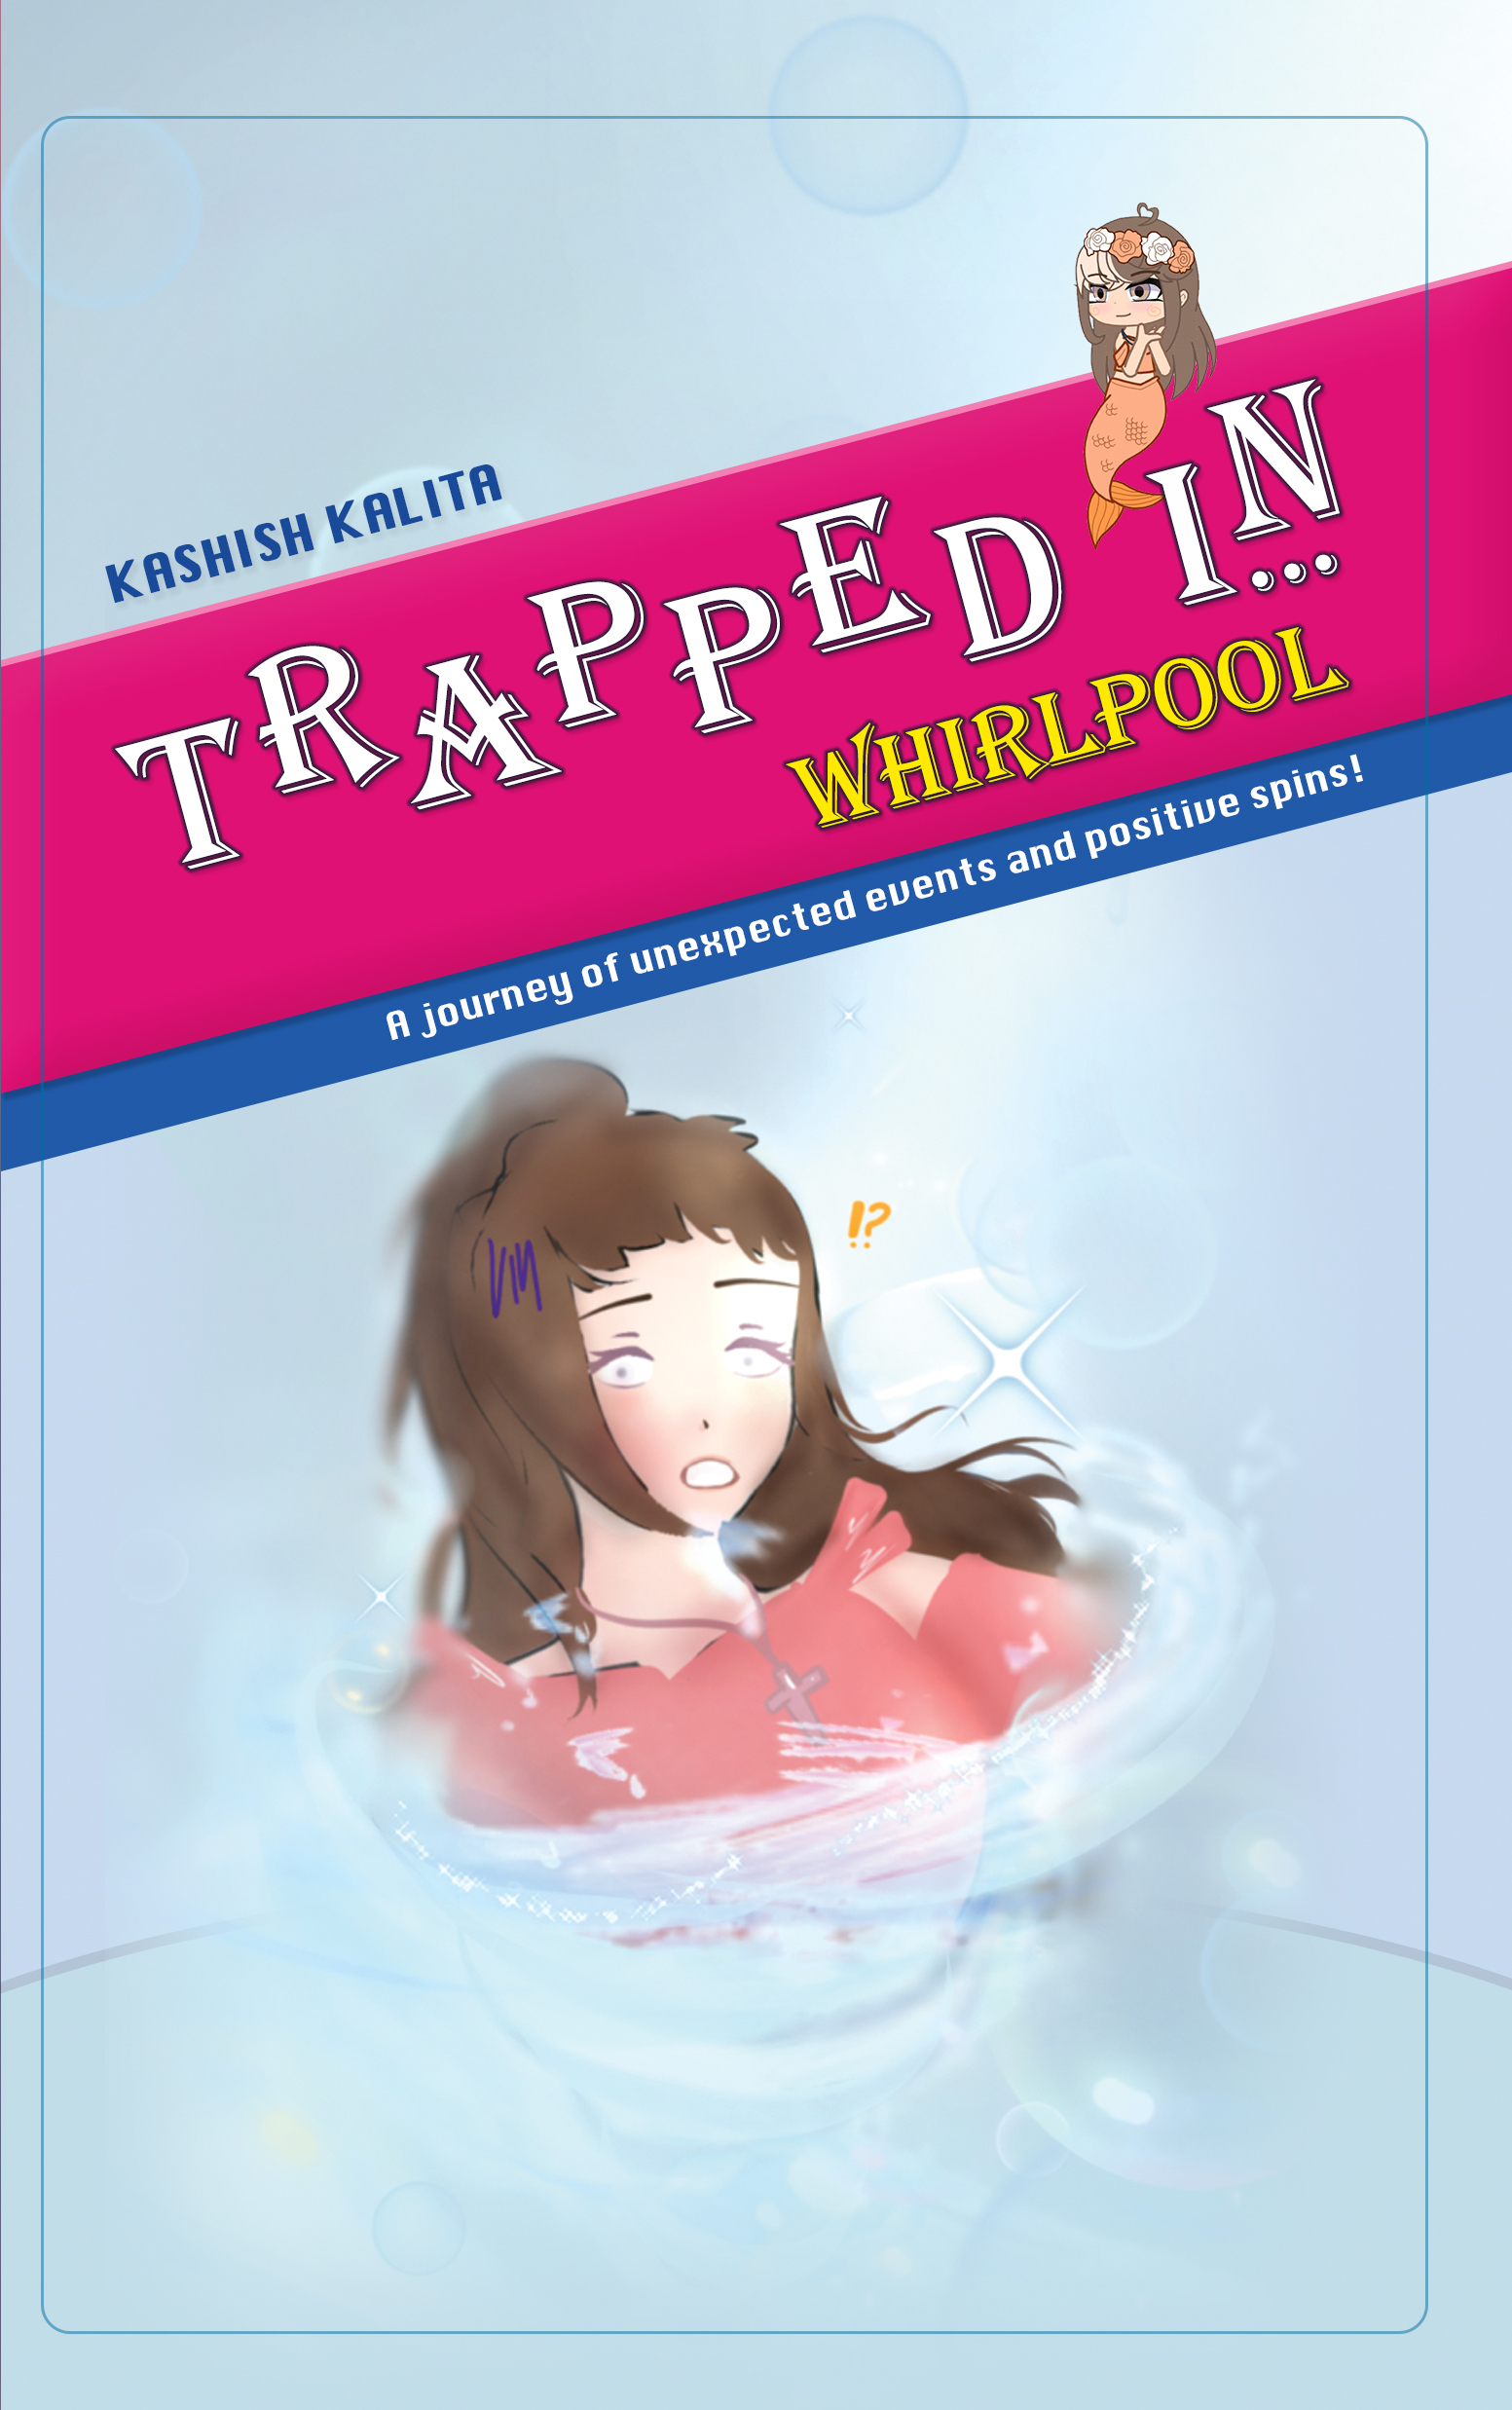 //thethinkshift.com/wp-content/uploads/2022/11/trapped-whirl.jpg